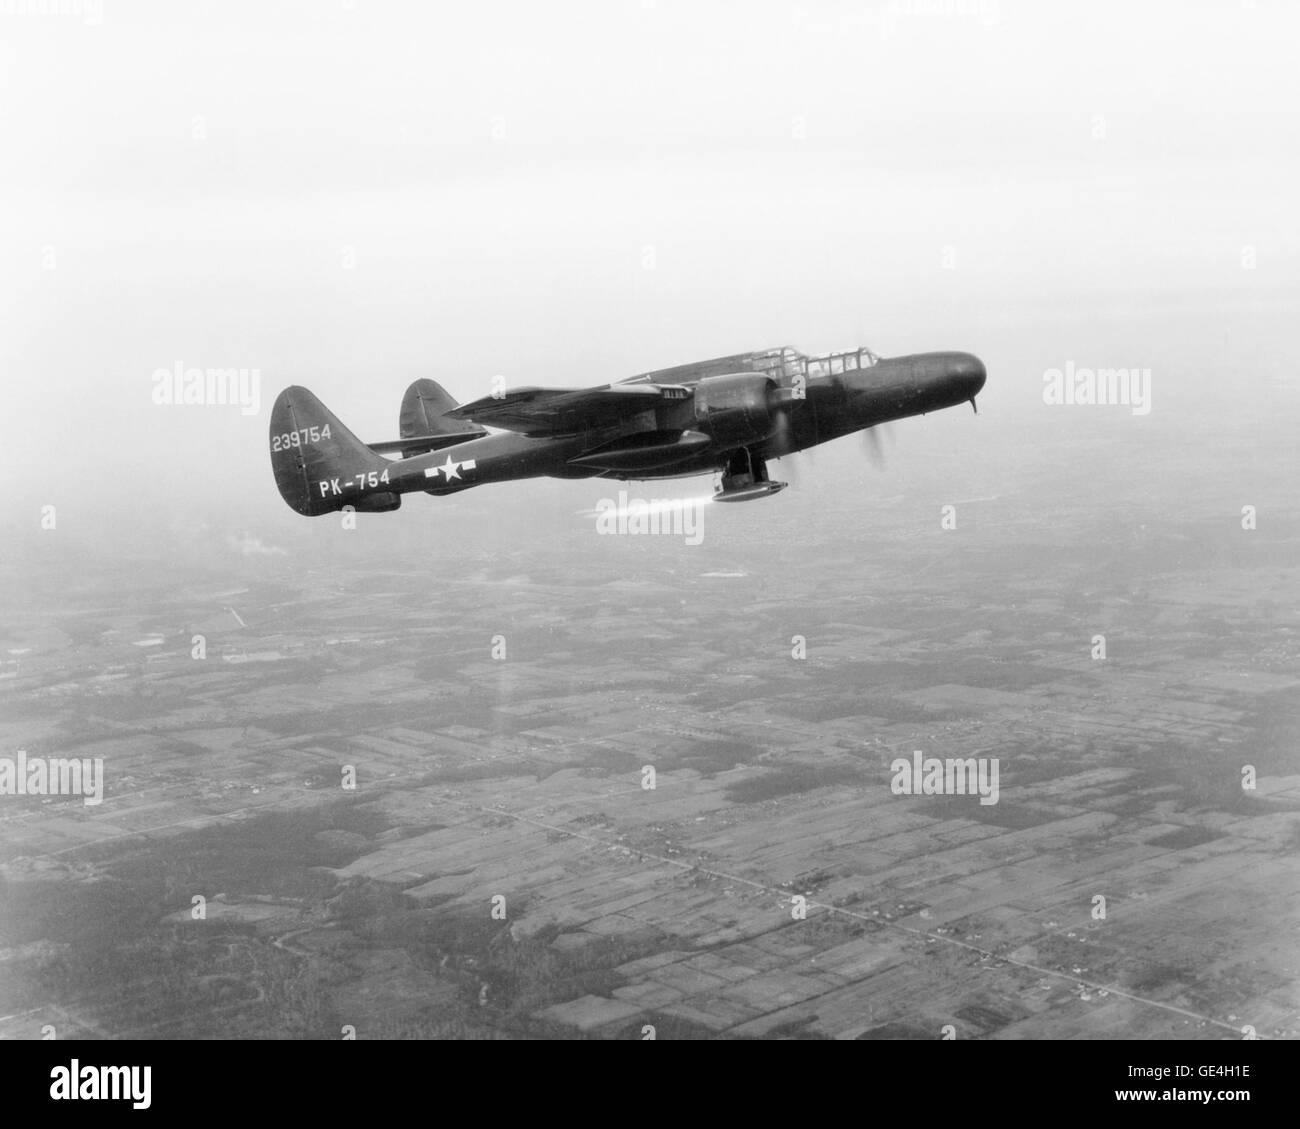 (January 27, 1947) P-61 airplane in flight test with ramjet burning. The P-61 aircraft was built by Nothrup and used by the Aircraft Engine Research Laboratory or AERL of the NACA to test the new jet engine. The AERL is now NASA's John H. Glenn Research Center in Cleveland, Ohio.   Image # : C1947-17743 Stock Photo